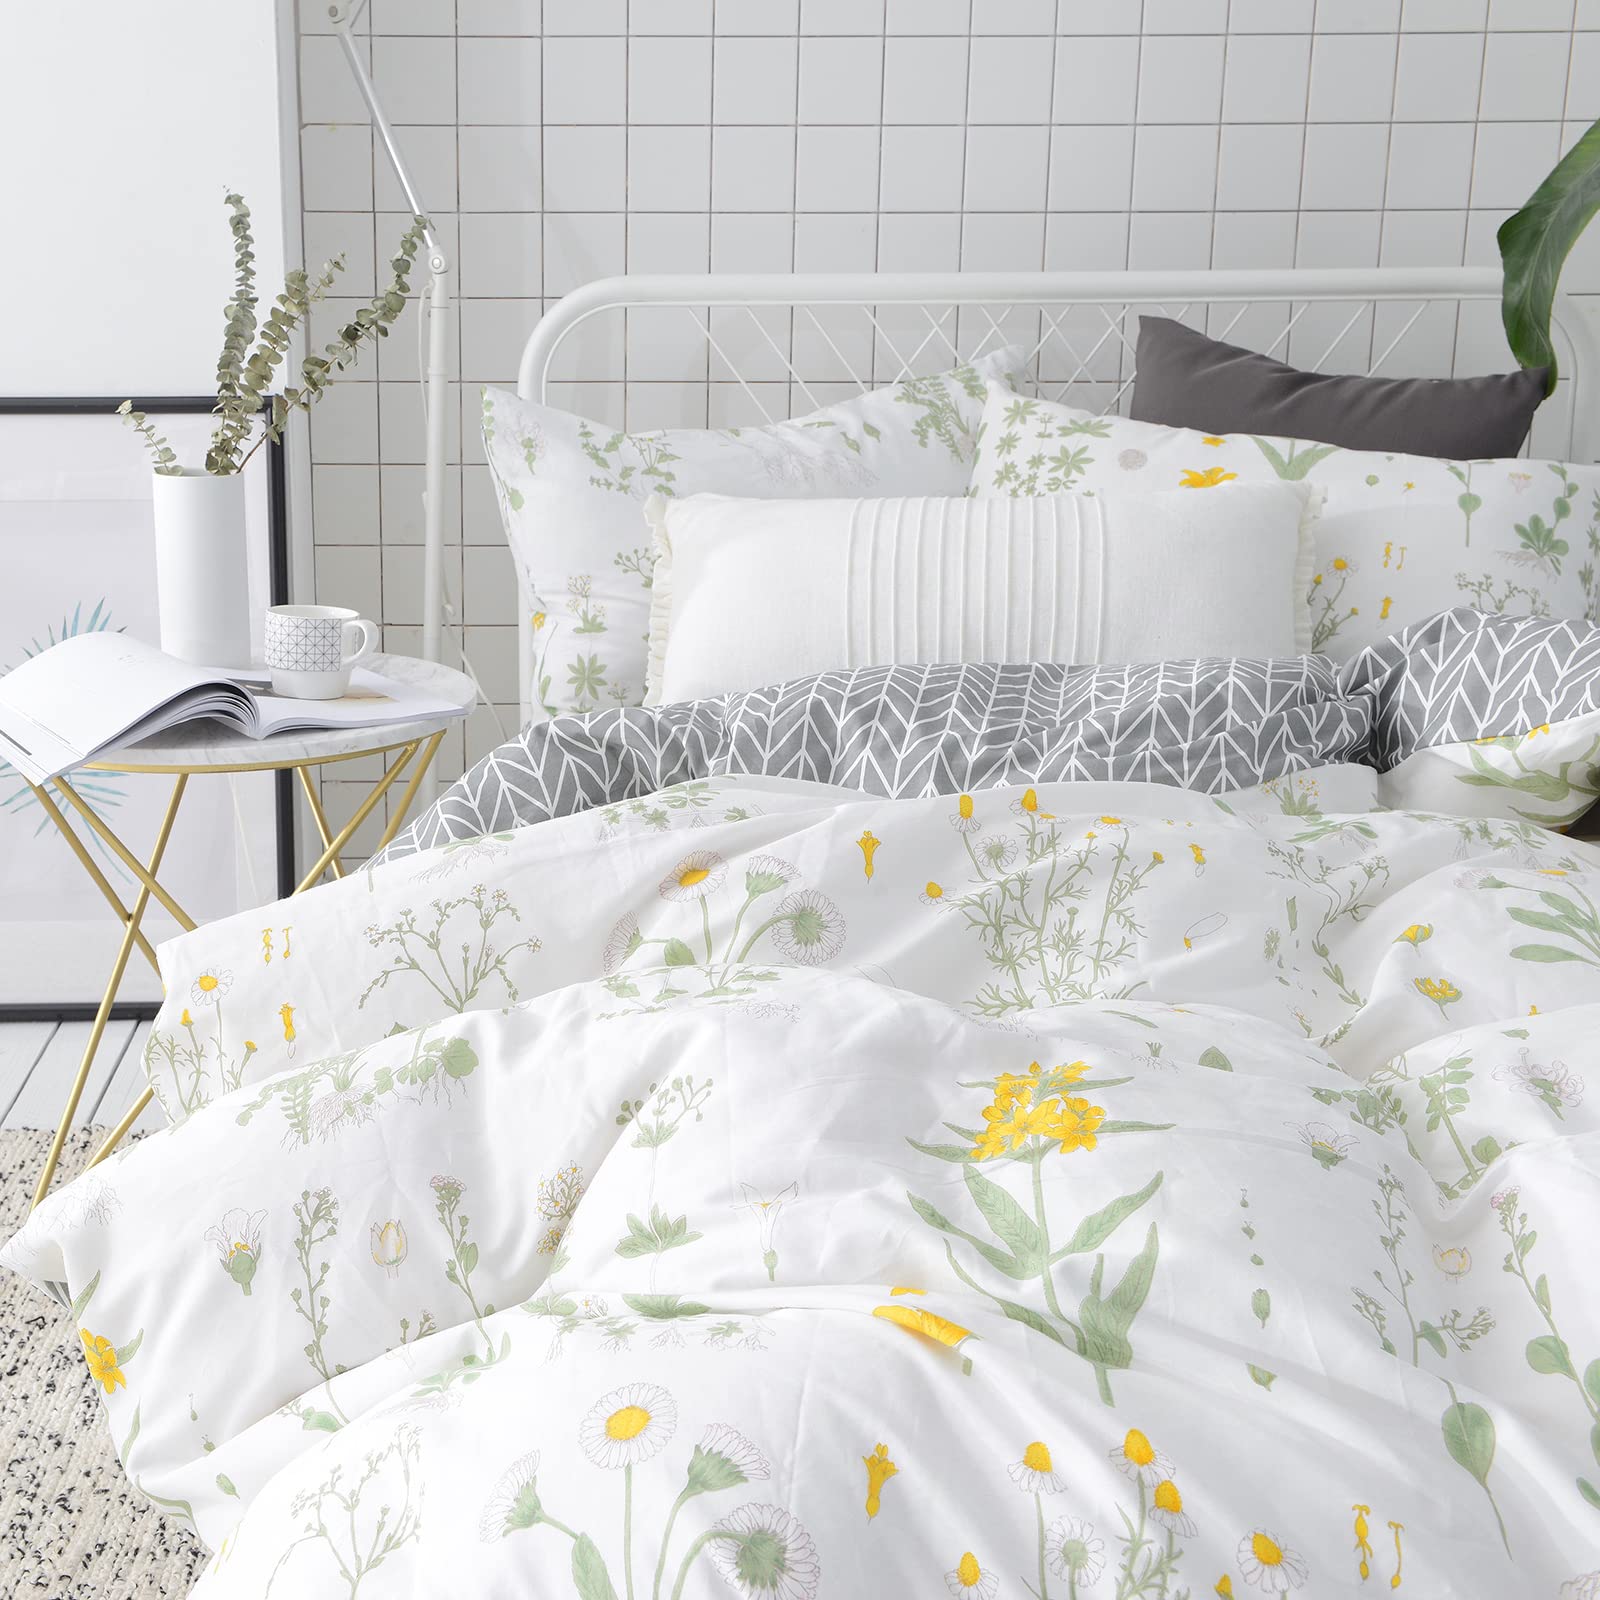 Book Cover VClife Twin Floral Duvet Cover Sets Cotton Yellow White Botanical Bedding Sets for Girl Woman -Reversible Arrow Printed Grey Bedding Collection - 3 pcs Vintage Garden Plant Style Quilt Cover Sets Twin